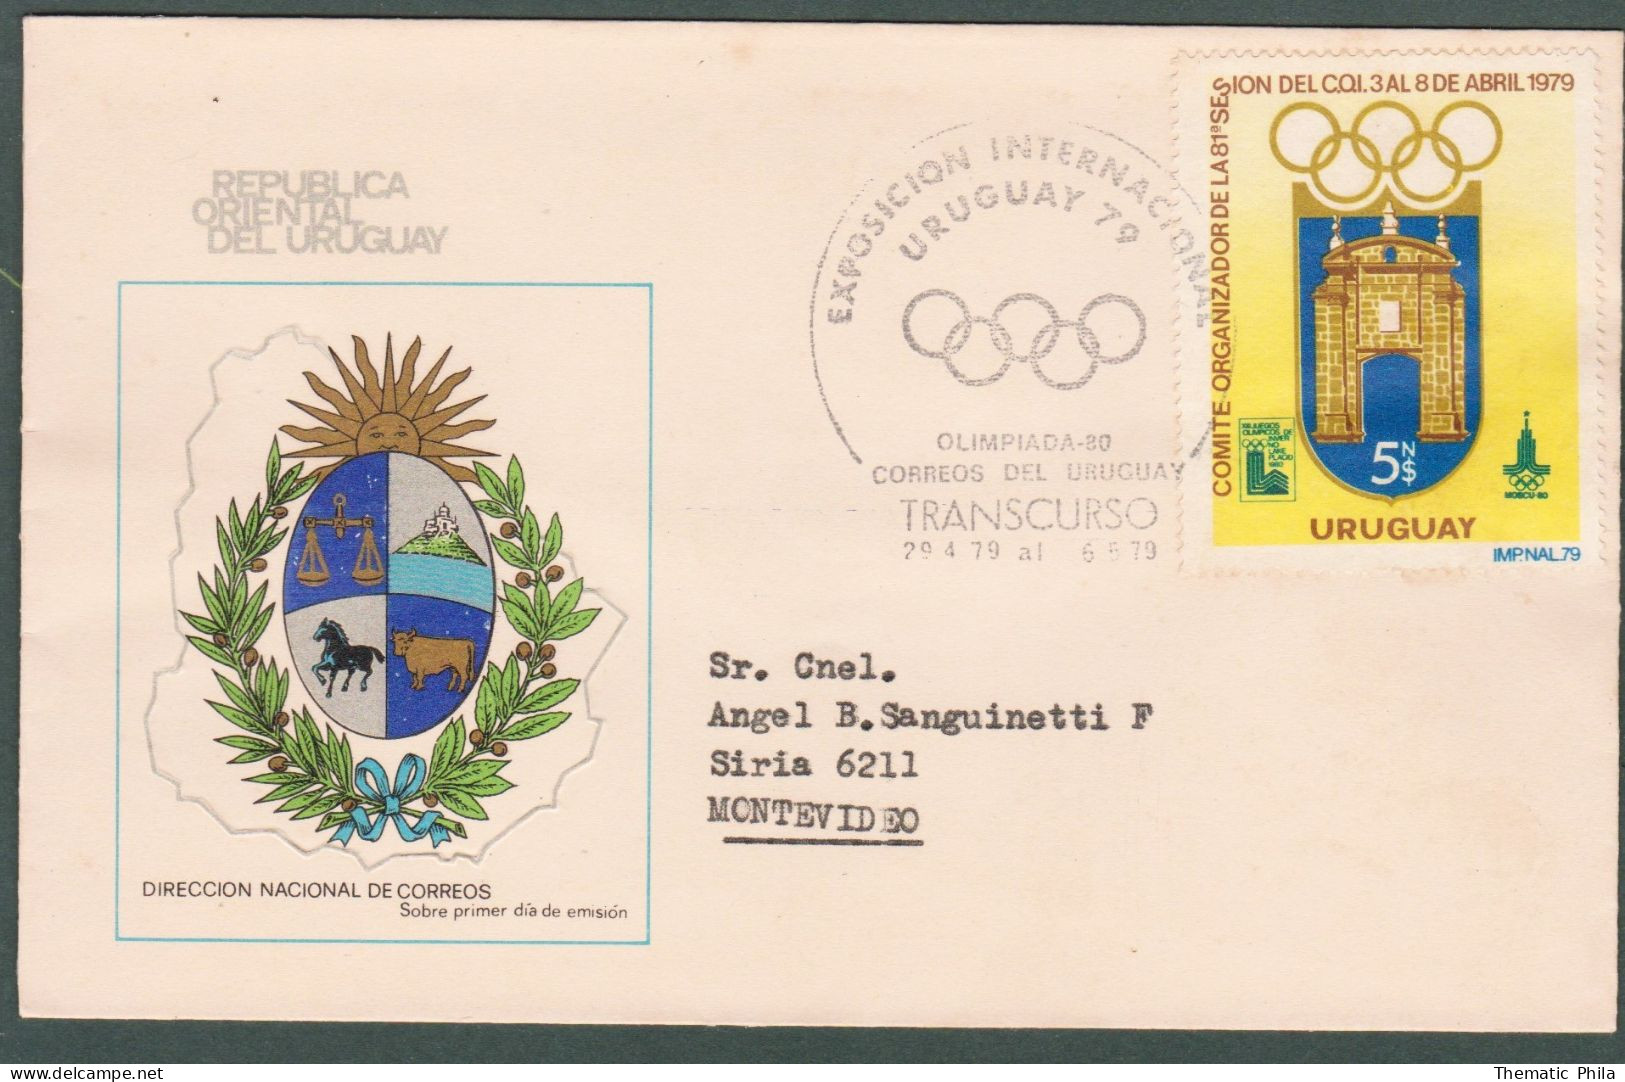 1979 URUGUAY Special Postmark Transcurso Expo International Olympic Games -Comité International Olympique Moscu 80 - Winter 1980: Lake Placid